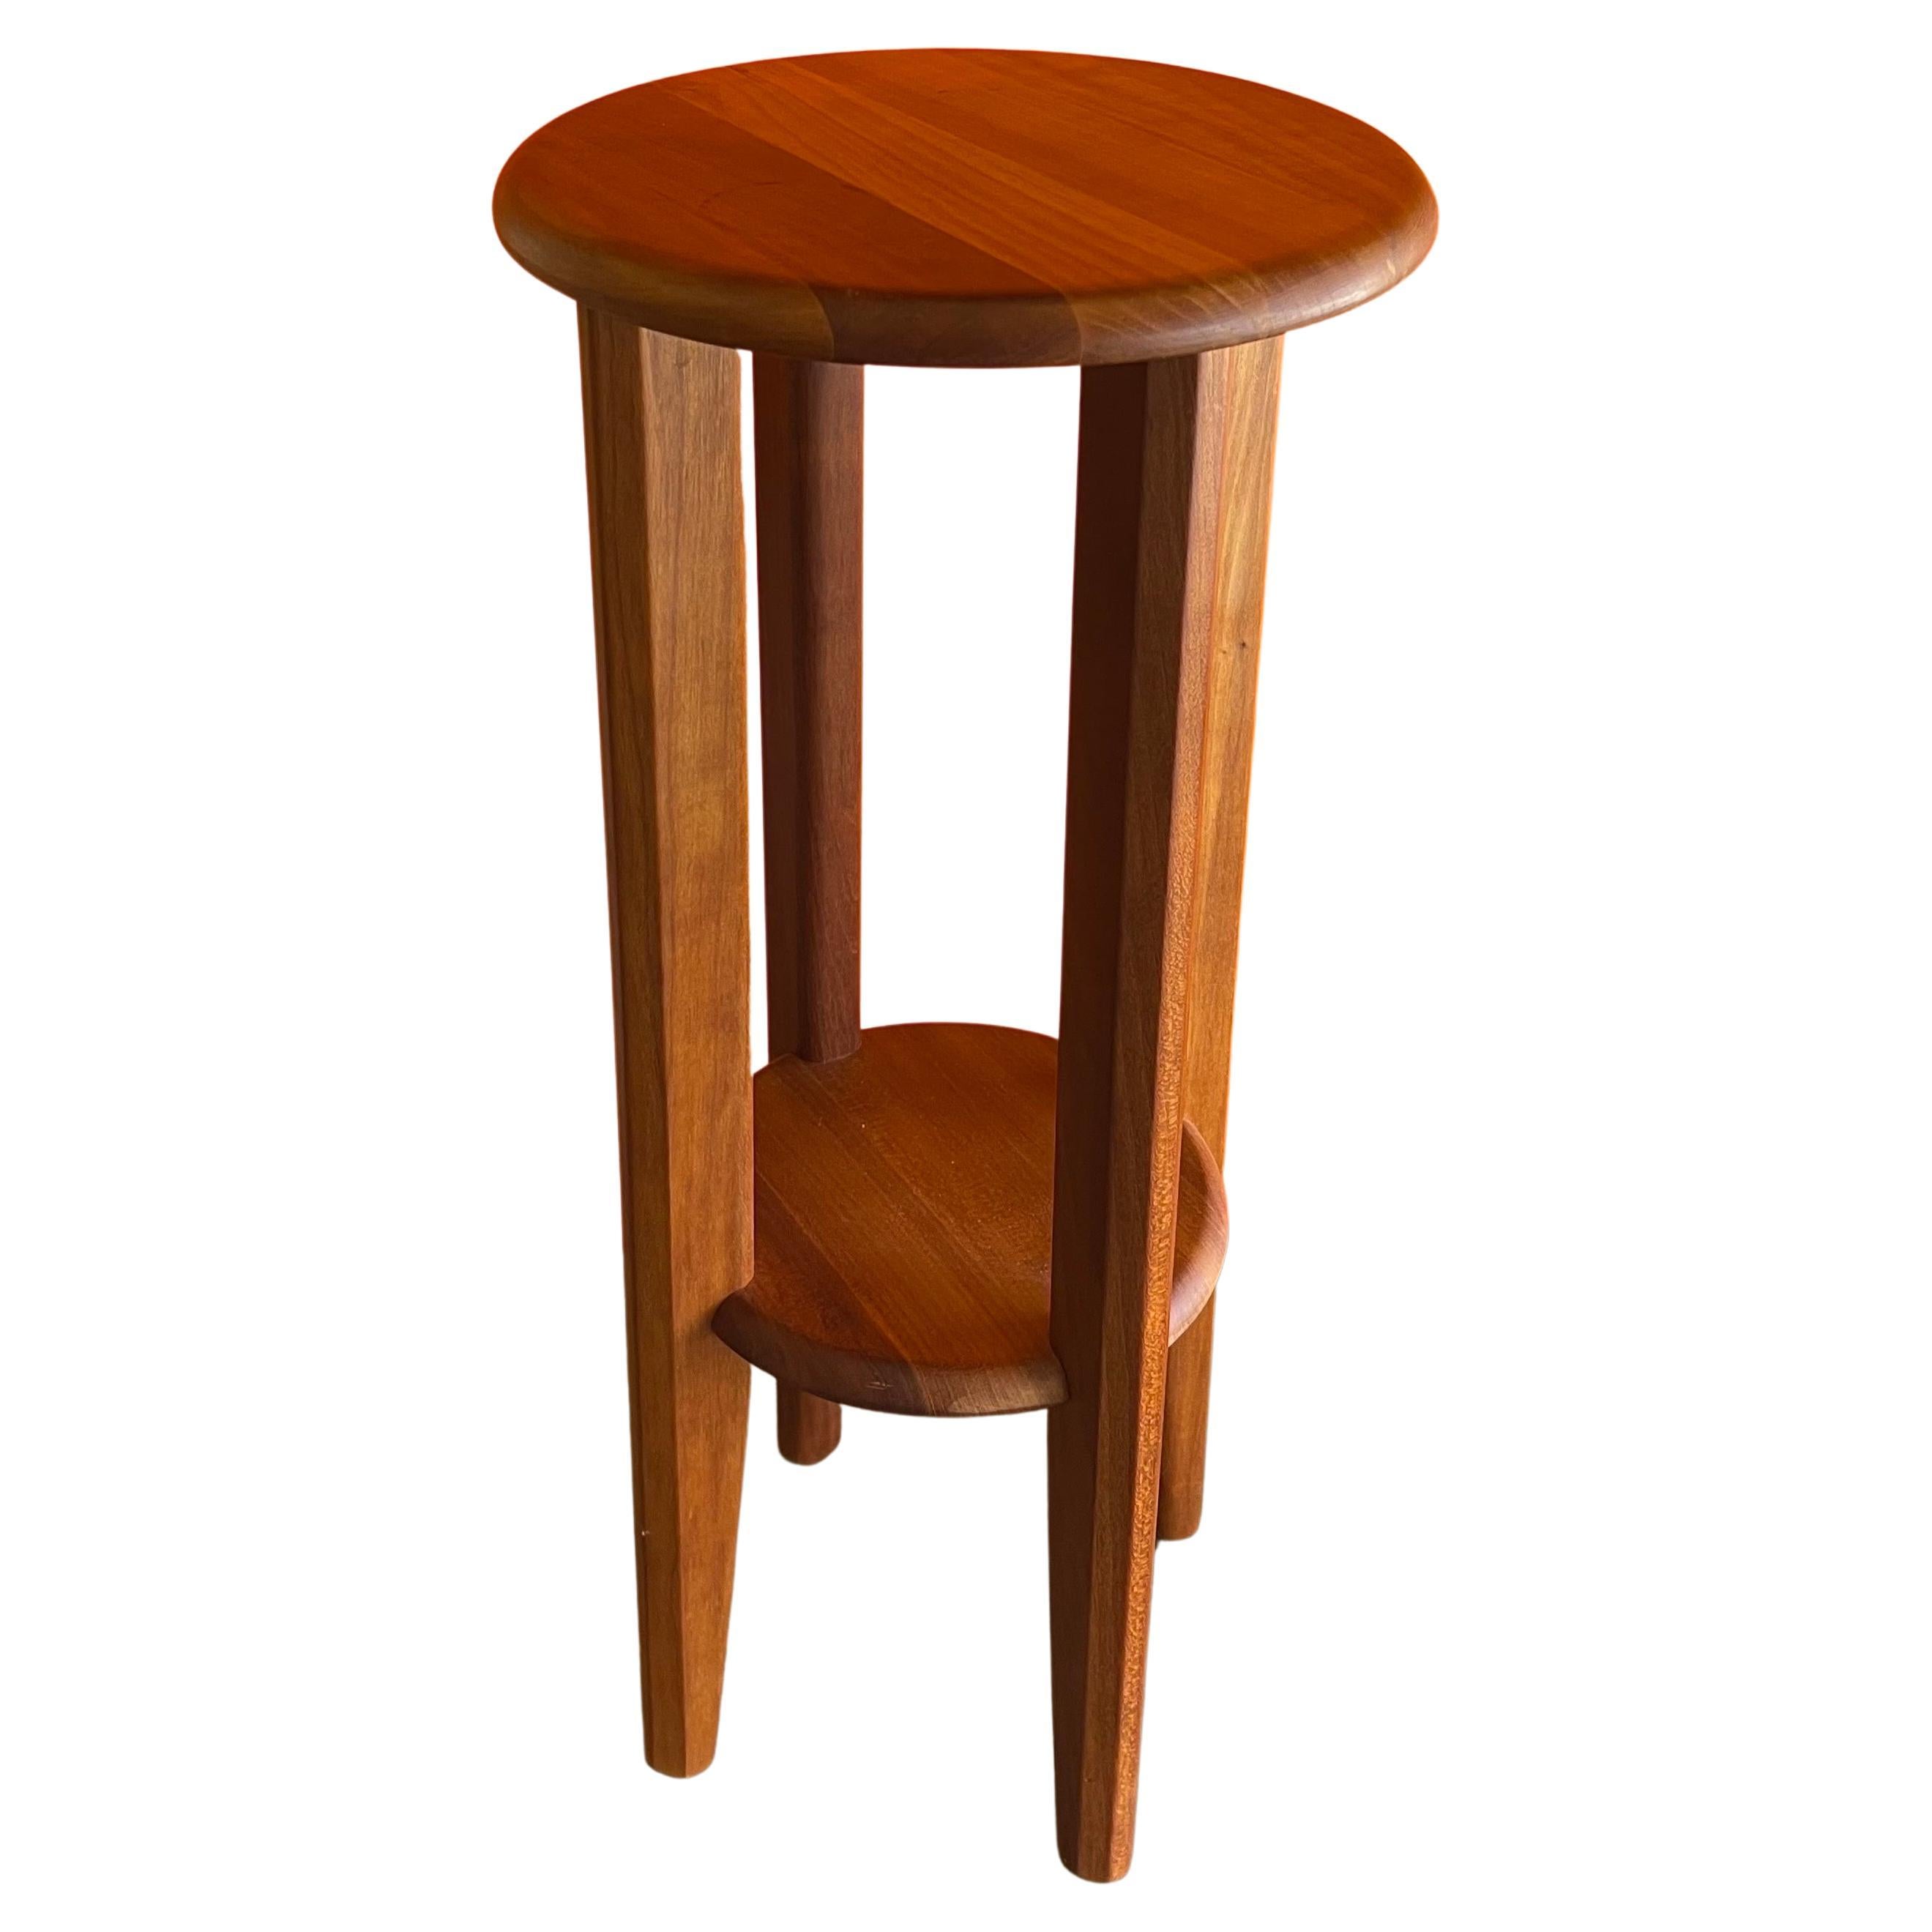 Danish Modern Petite Teak Side Table / Plant Stand by Ansbarger Mobler For Sale